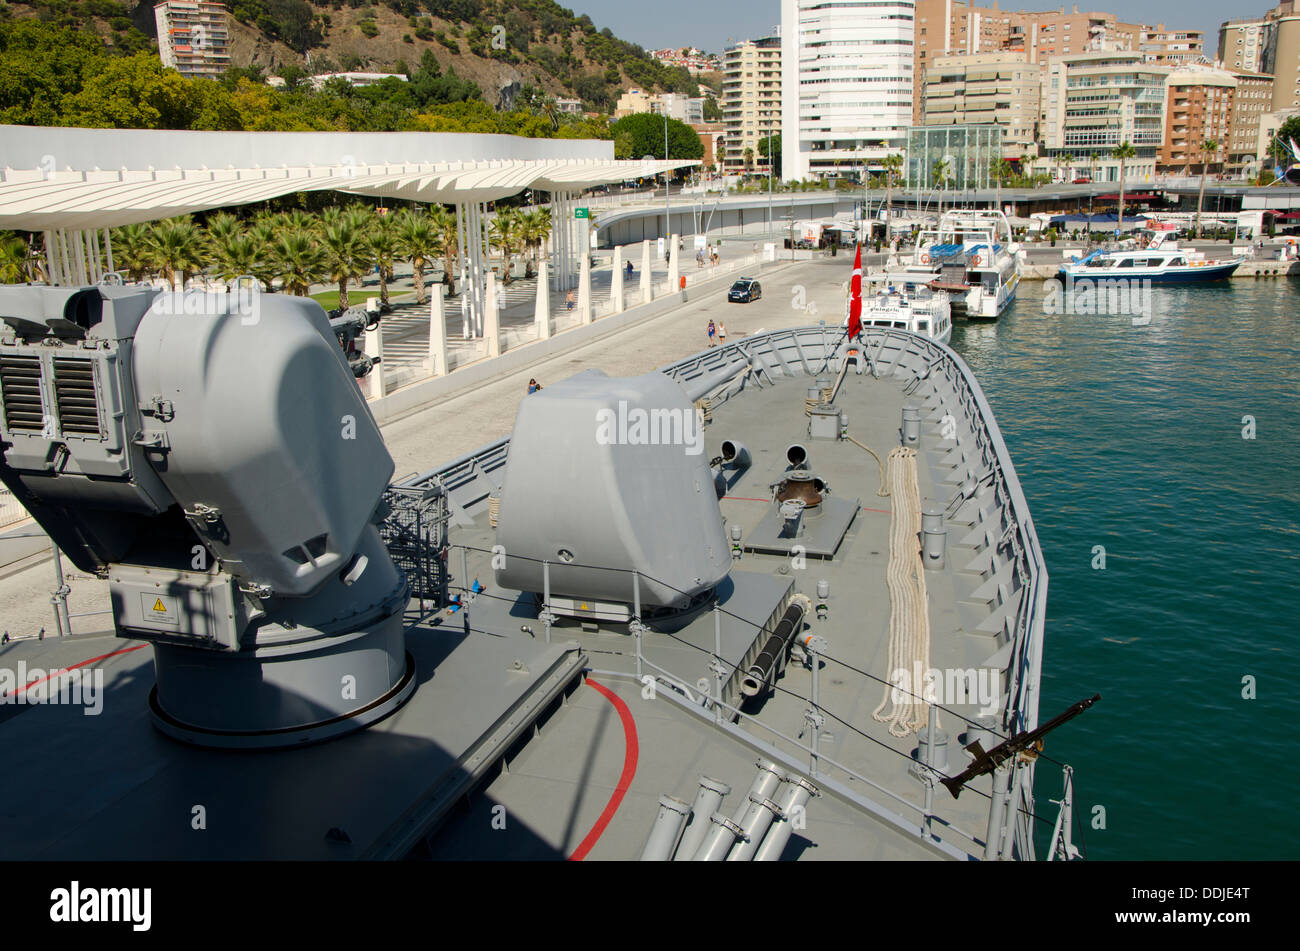 Turkish navy frigate Salih Reis of the Nato in the port of Malaga, Costa del Sol, Spain. Stock Photo